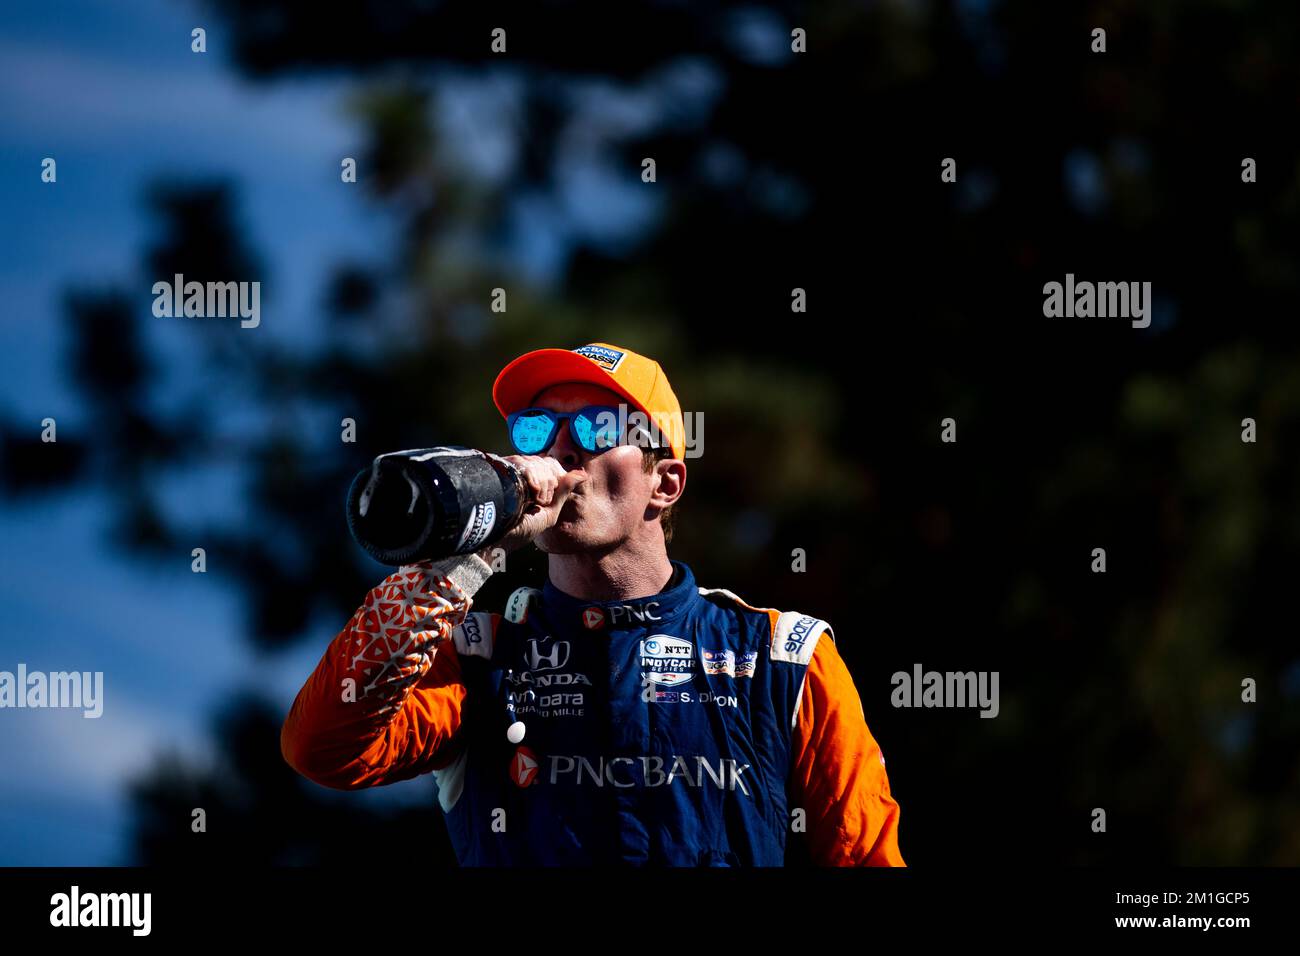 SCOTT DIXON (9) of Auckland, New Zealand celebrates in Victory Lane after the Grand Prix of Portland at Portland International Raceway in Portland, OR, USA. Stock Photo